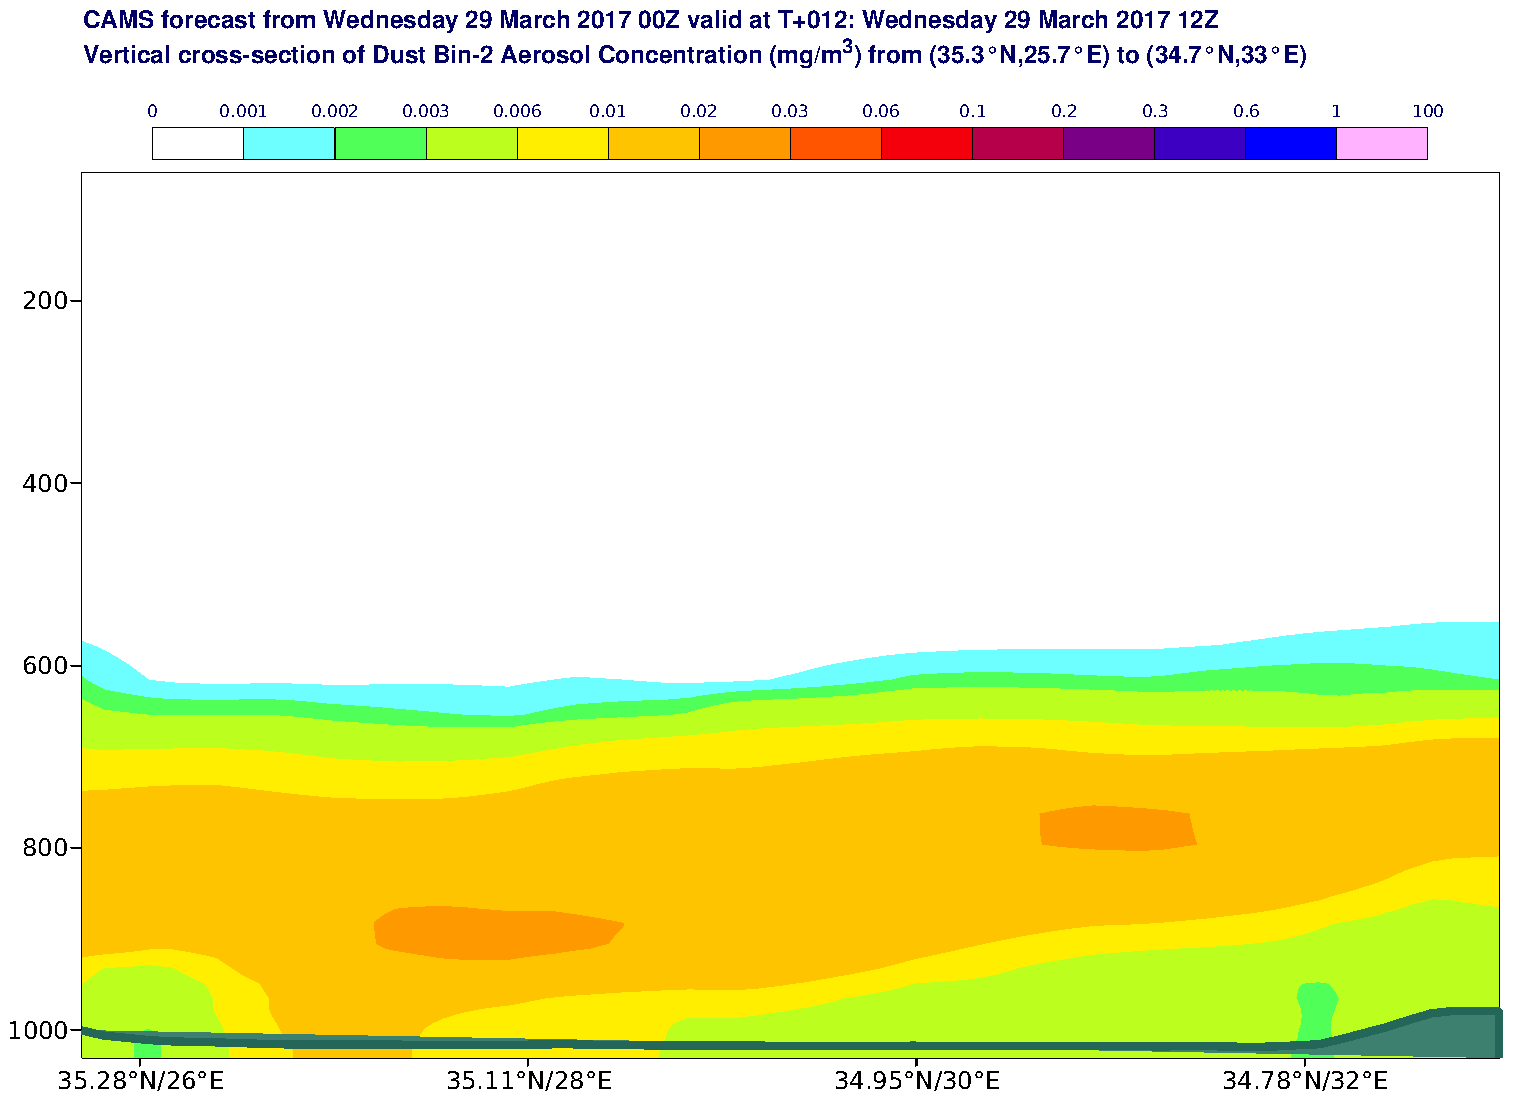 Vertical cross-section of Dust Bin-2 Aerosol Concentration (mg/m3) valid at T12 - 2017-03-29 12:00